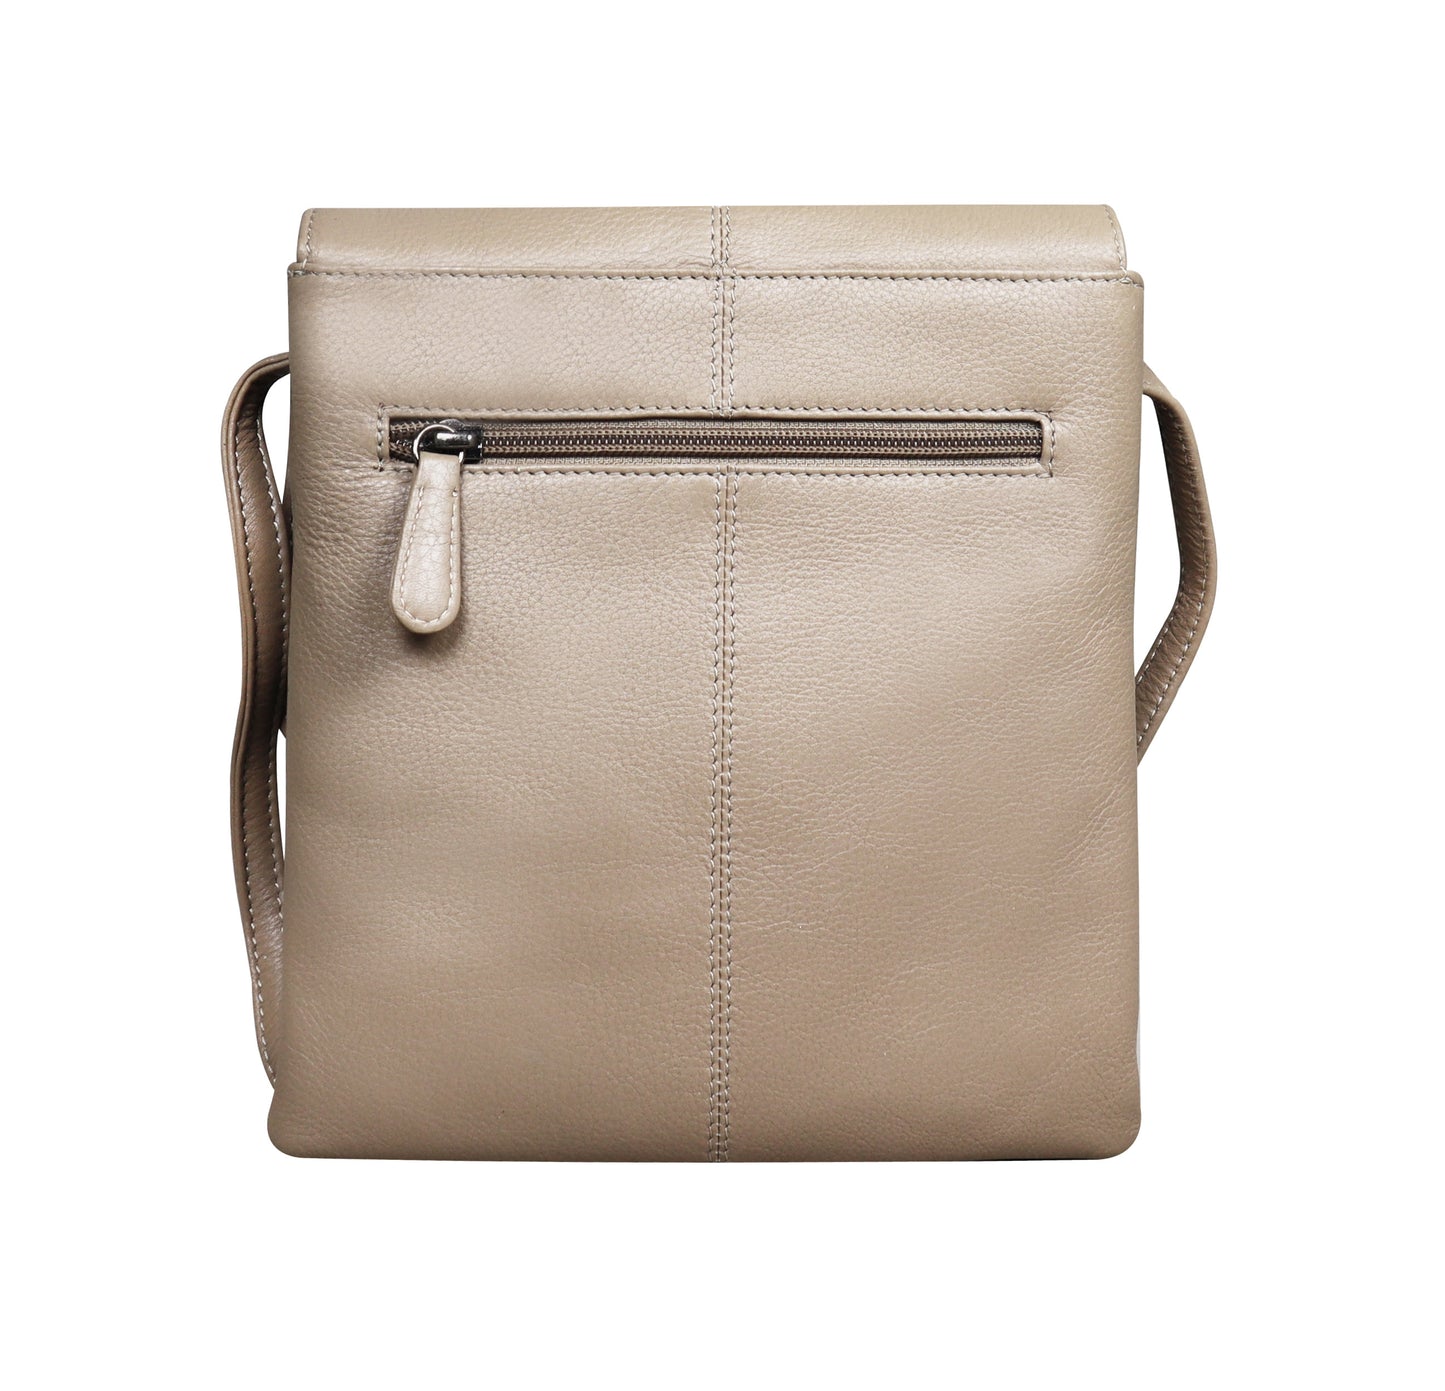 Calfnero Genuine Leather Women's Sling Bag (712740-Taupe)